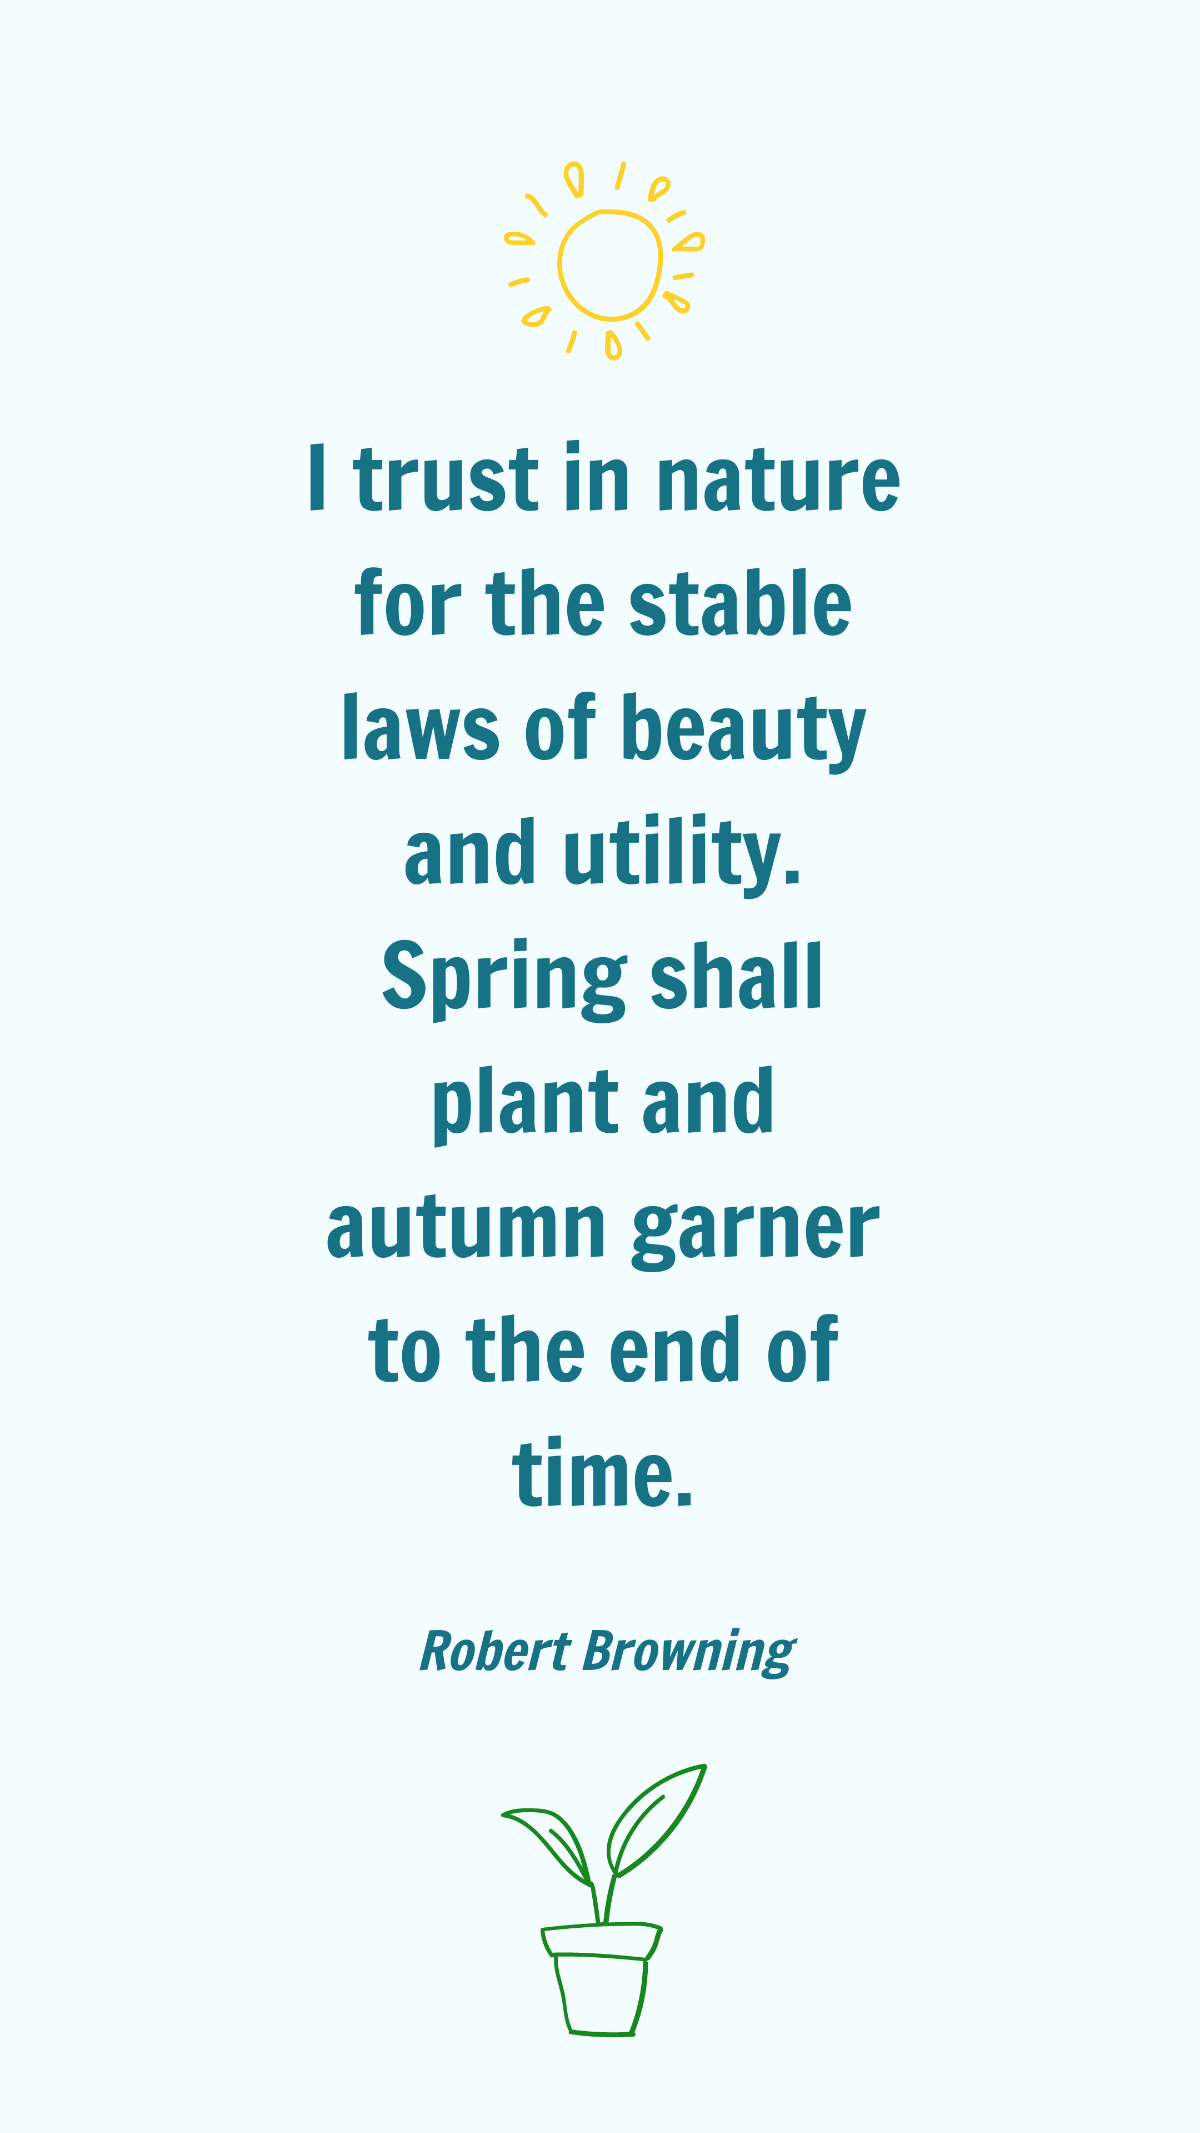 Robert Browning - I trust in nature for the stable laws of beauty and utility. Spring shall plant and autumn garner to the end of time.